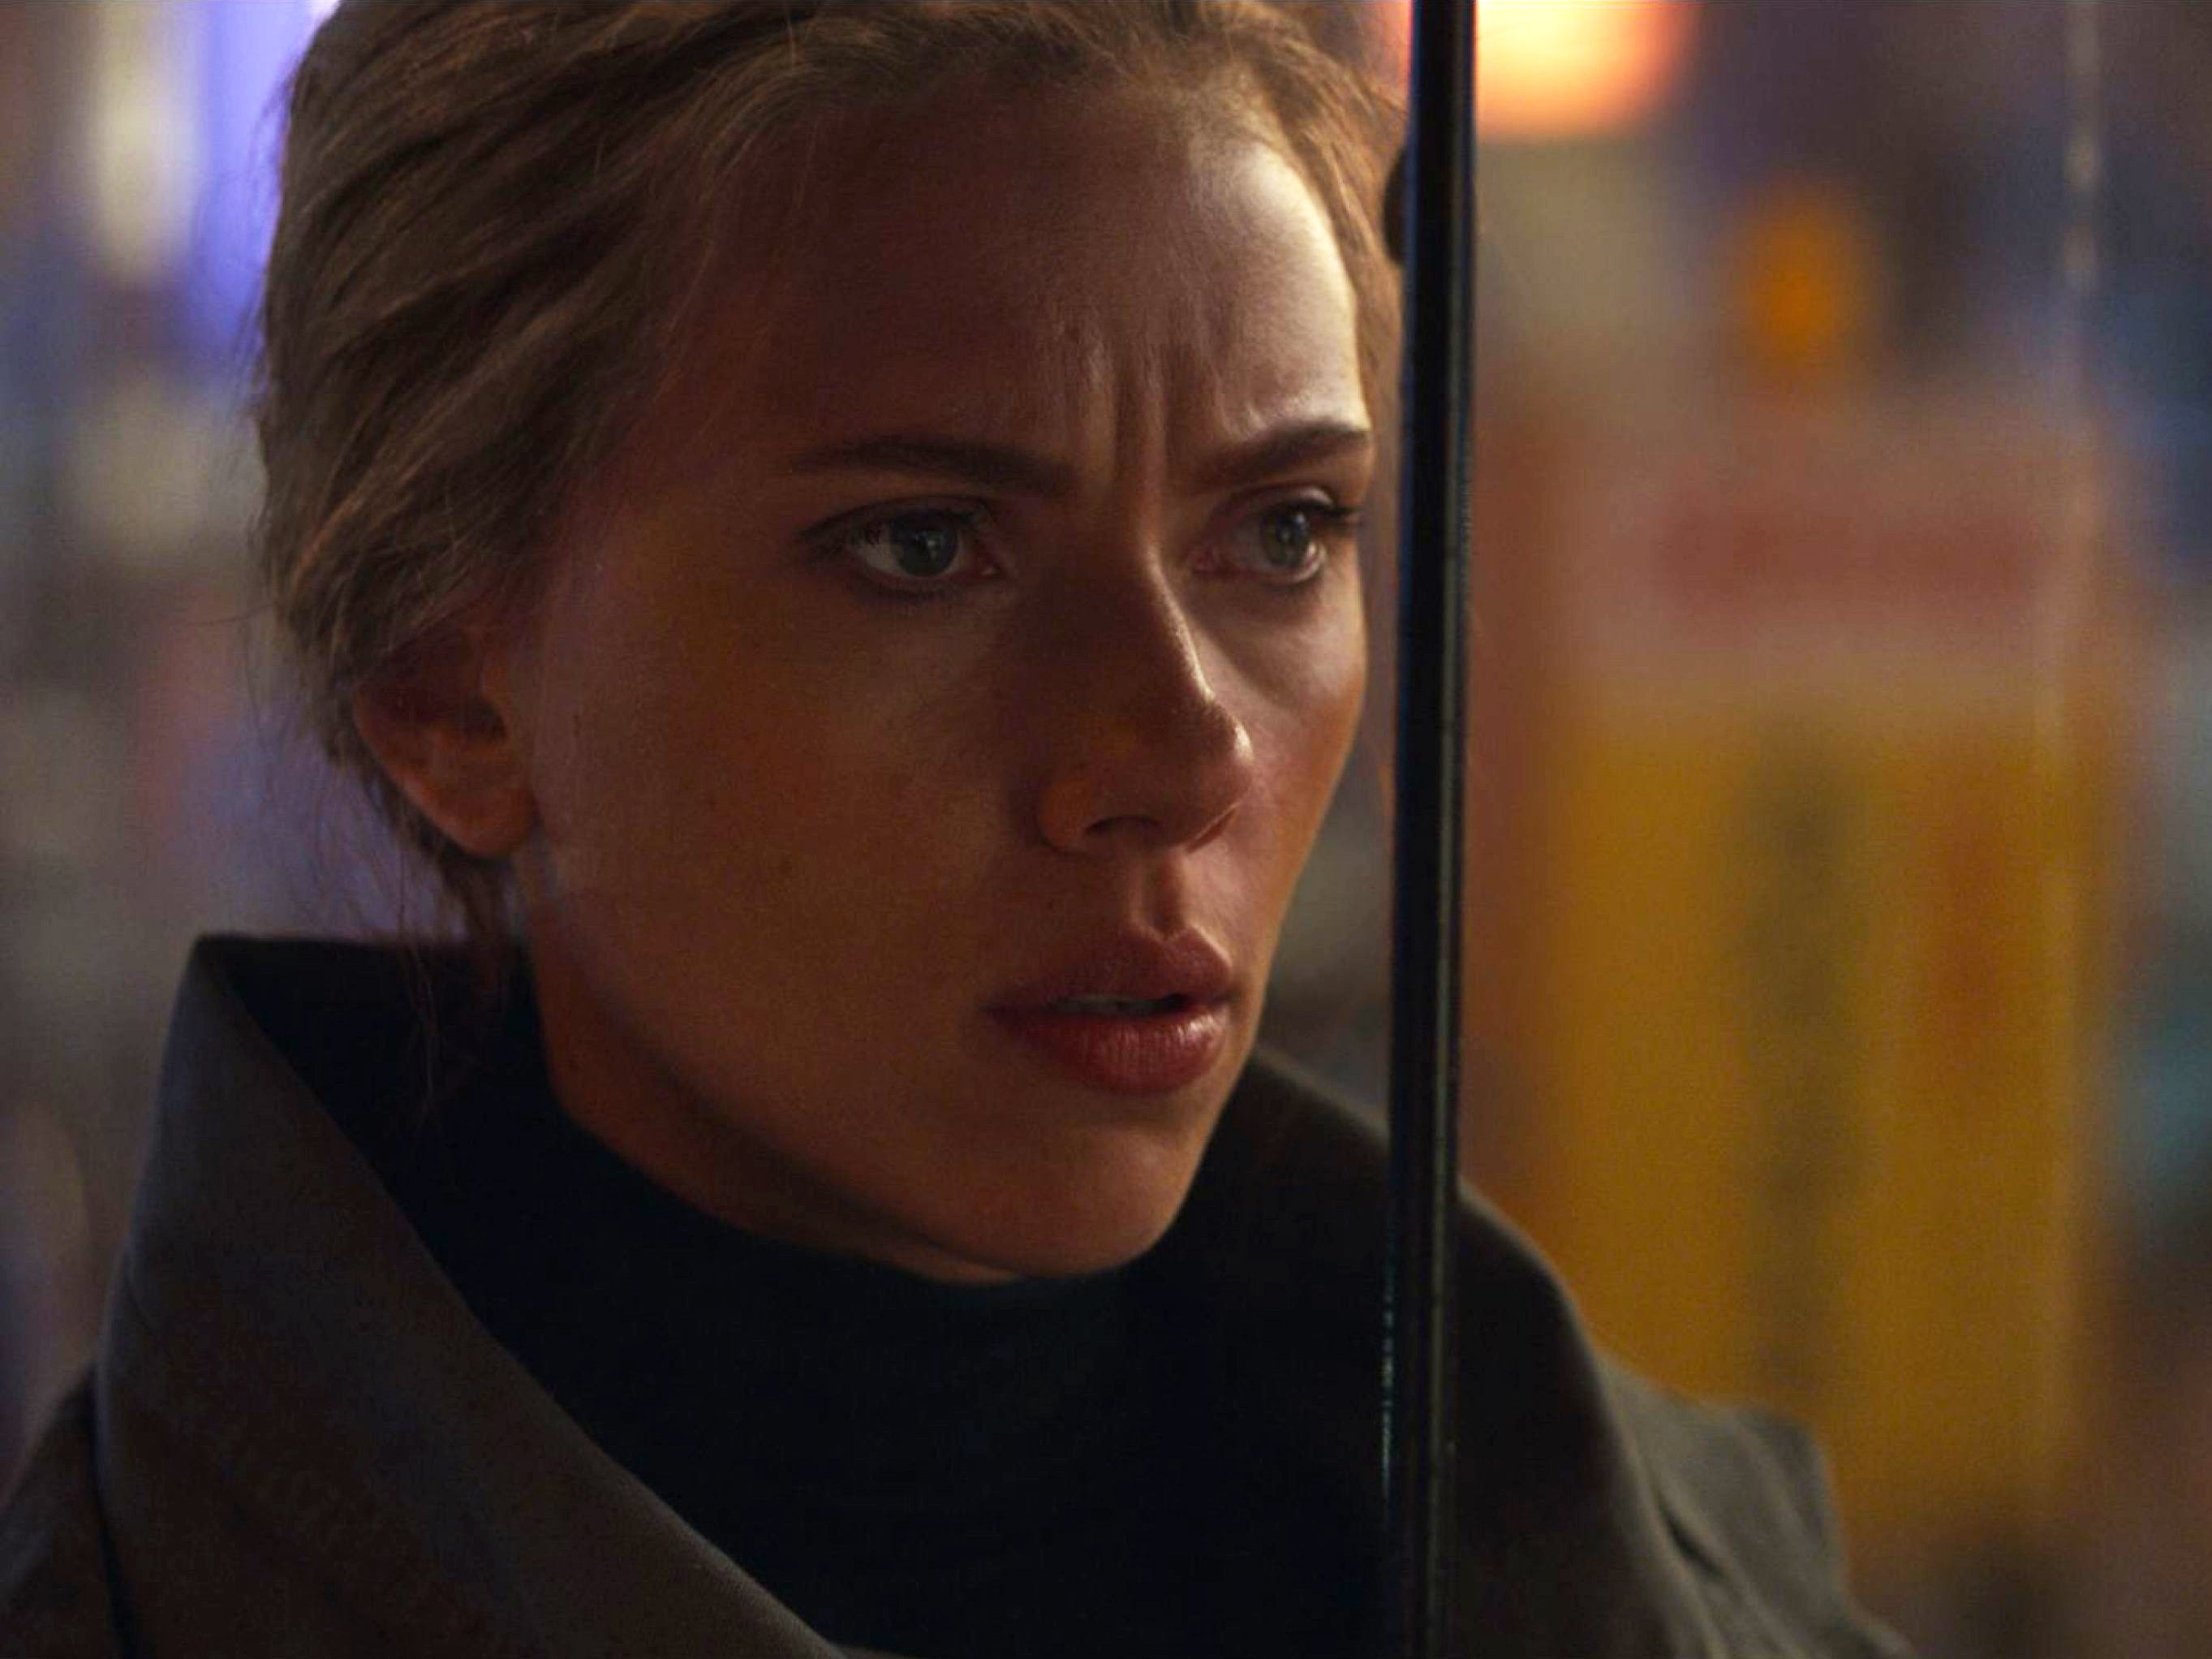 The ‘Black Widow’ star is suing Disney over lost earnings